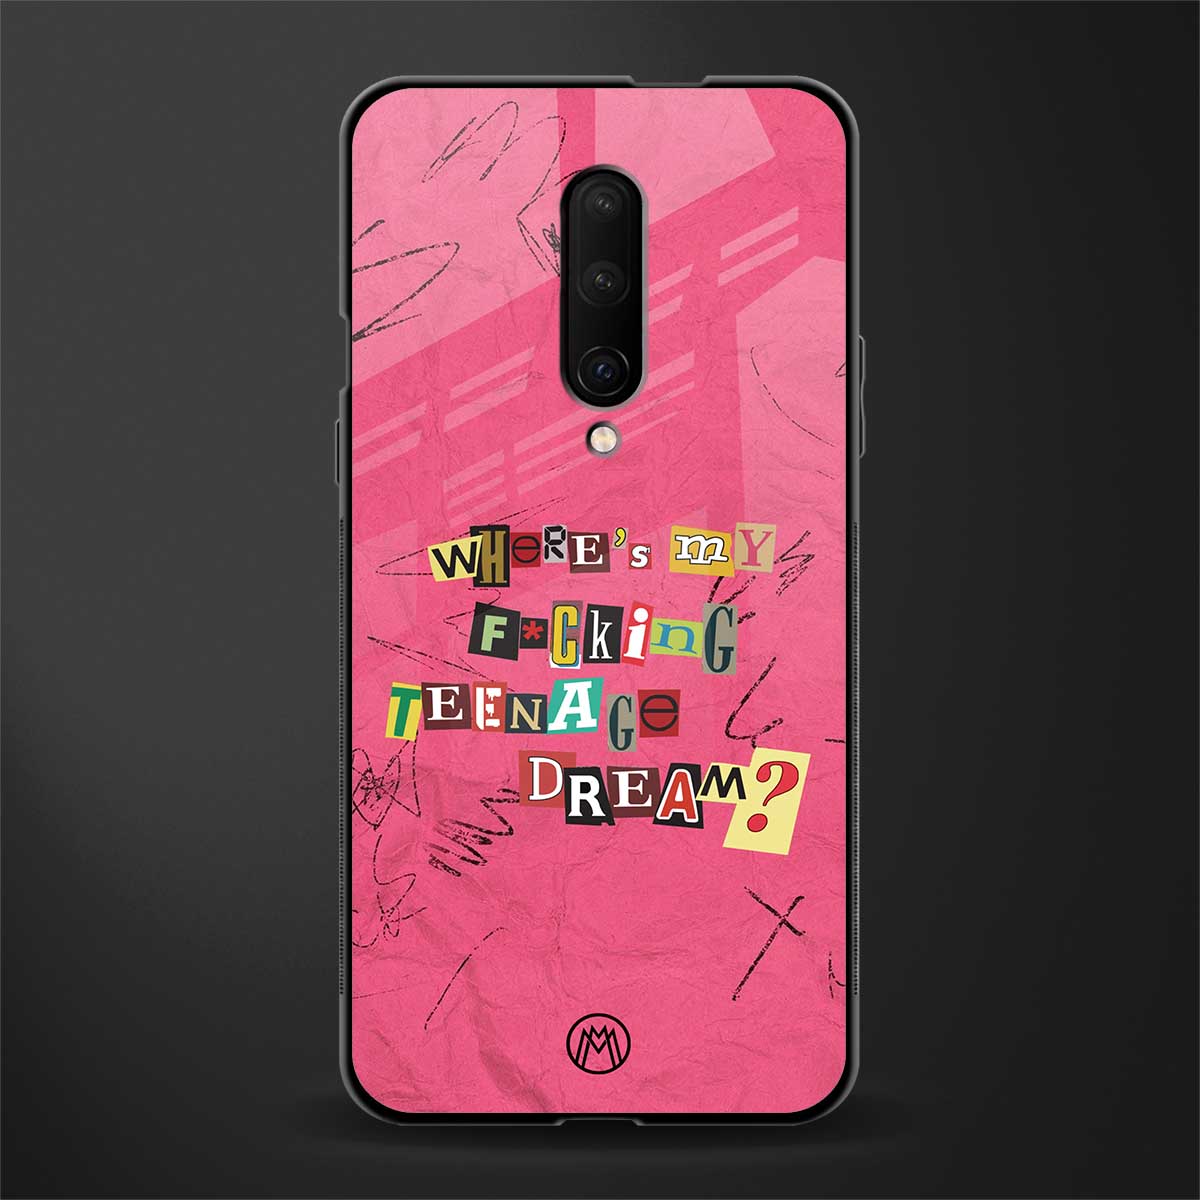 teenage dream glass case for oneplus 7 pro image